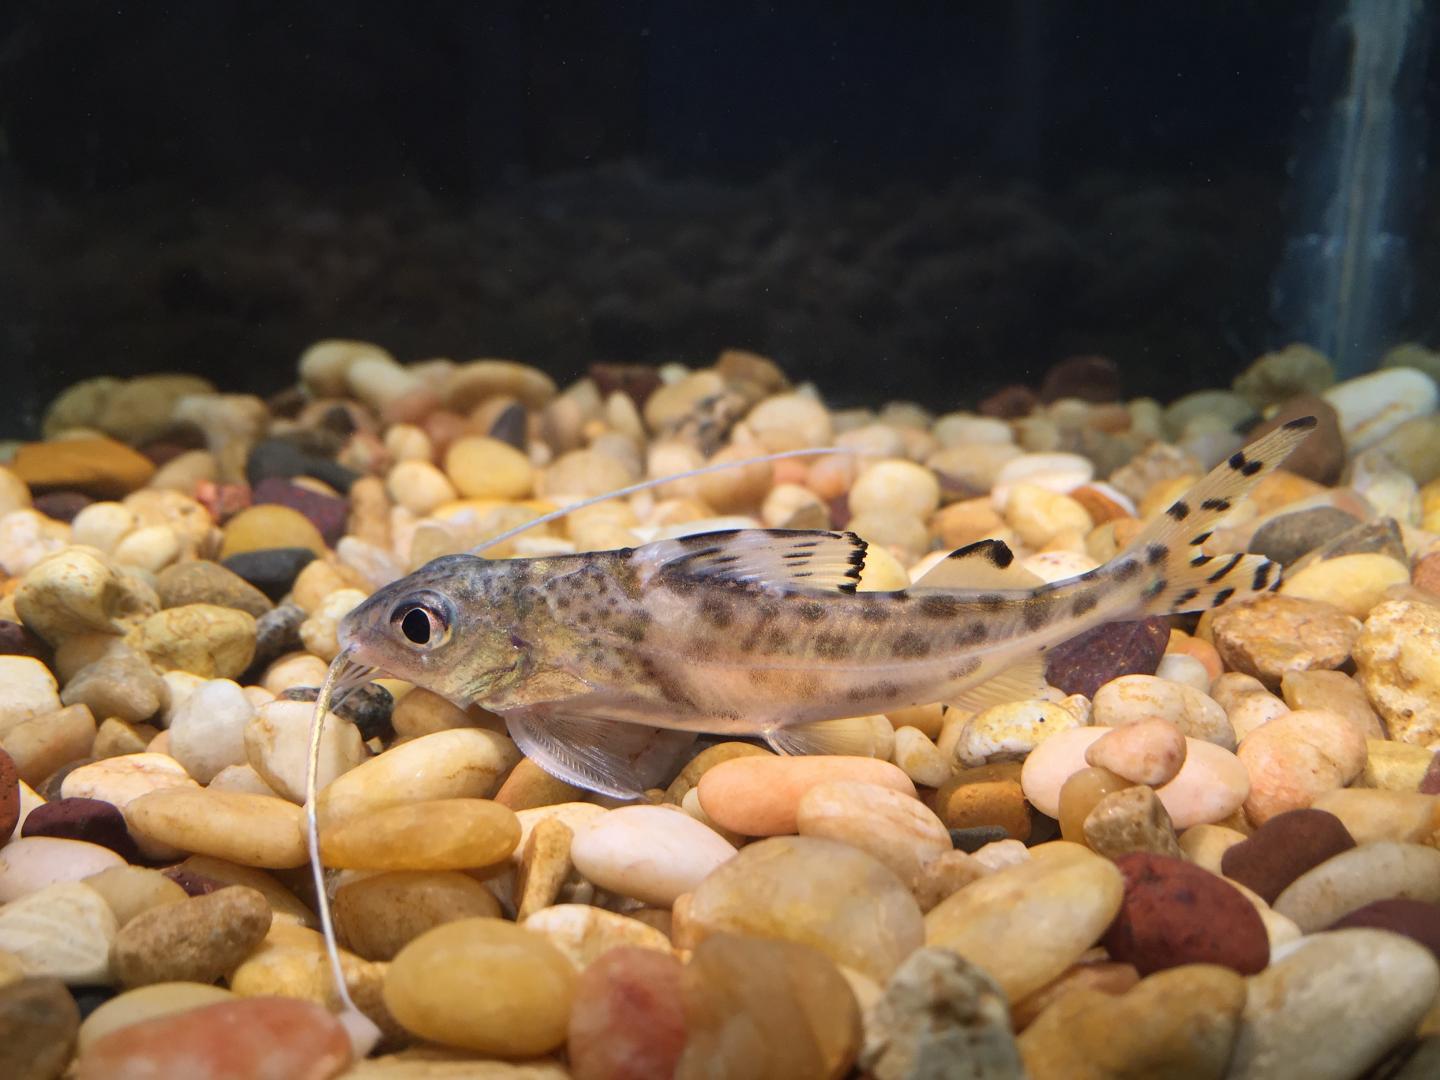 The Pictus Catfish Can Feel With Its Fins (1/2)